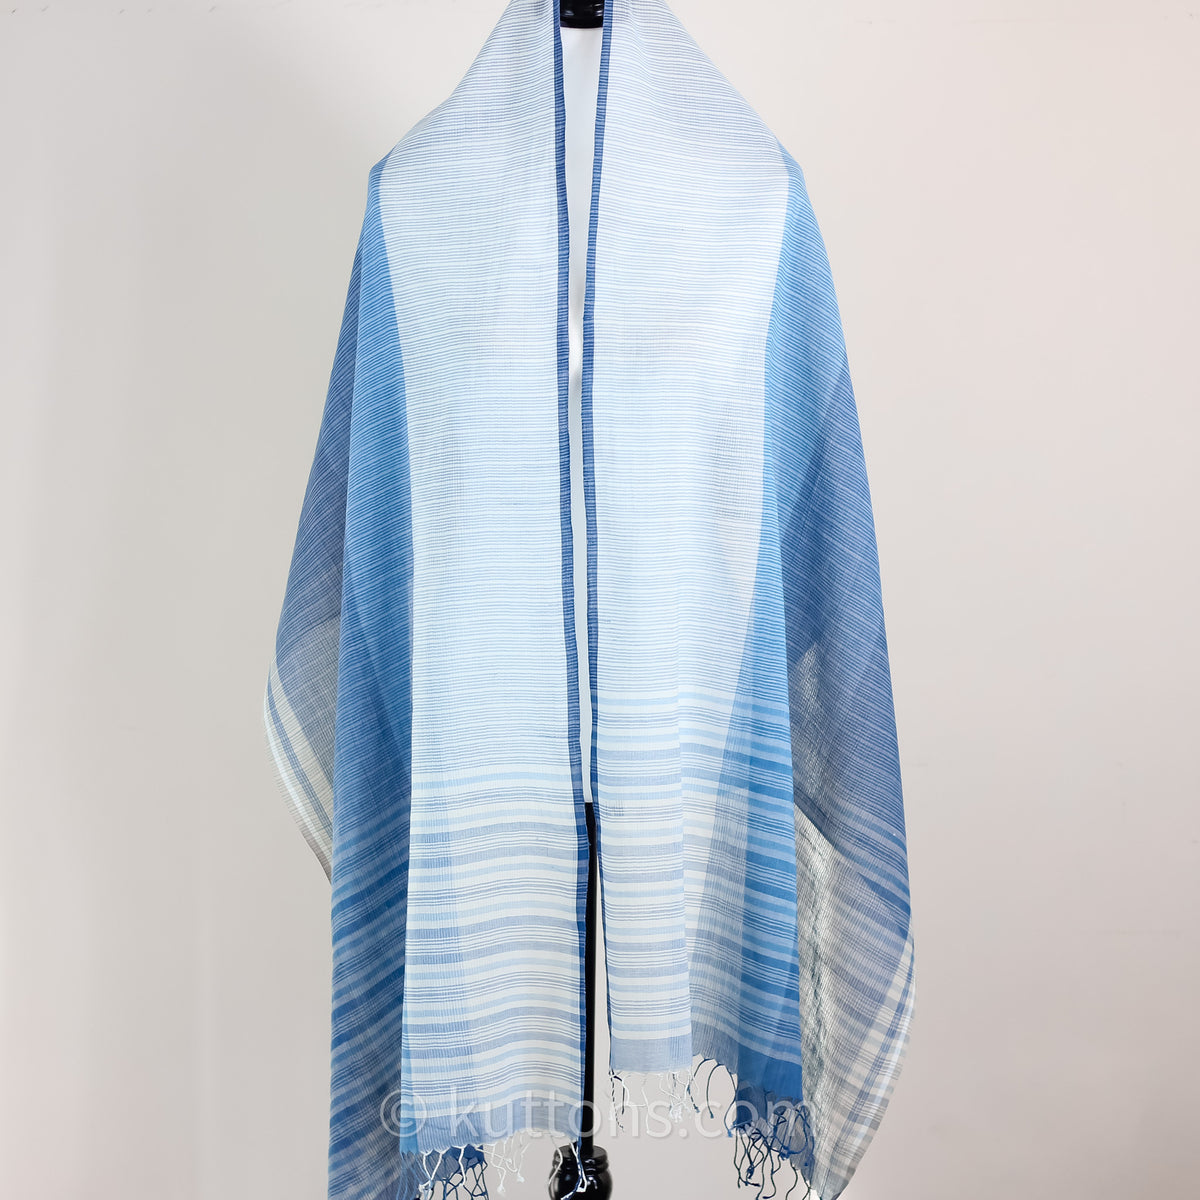 100% cotton stole scarf - handwovem, naturally dyed